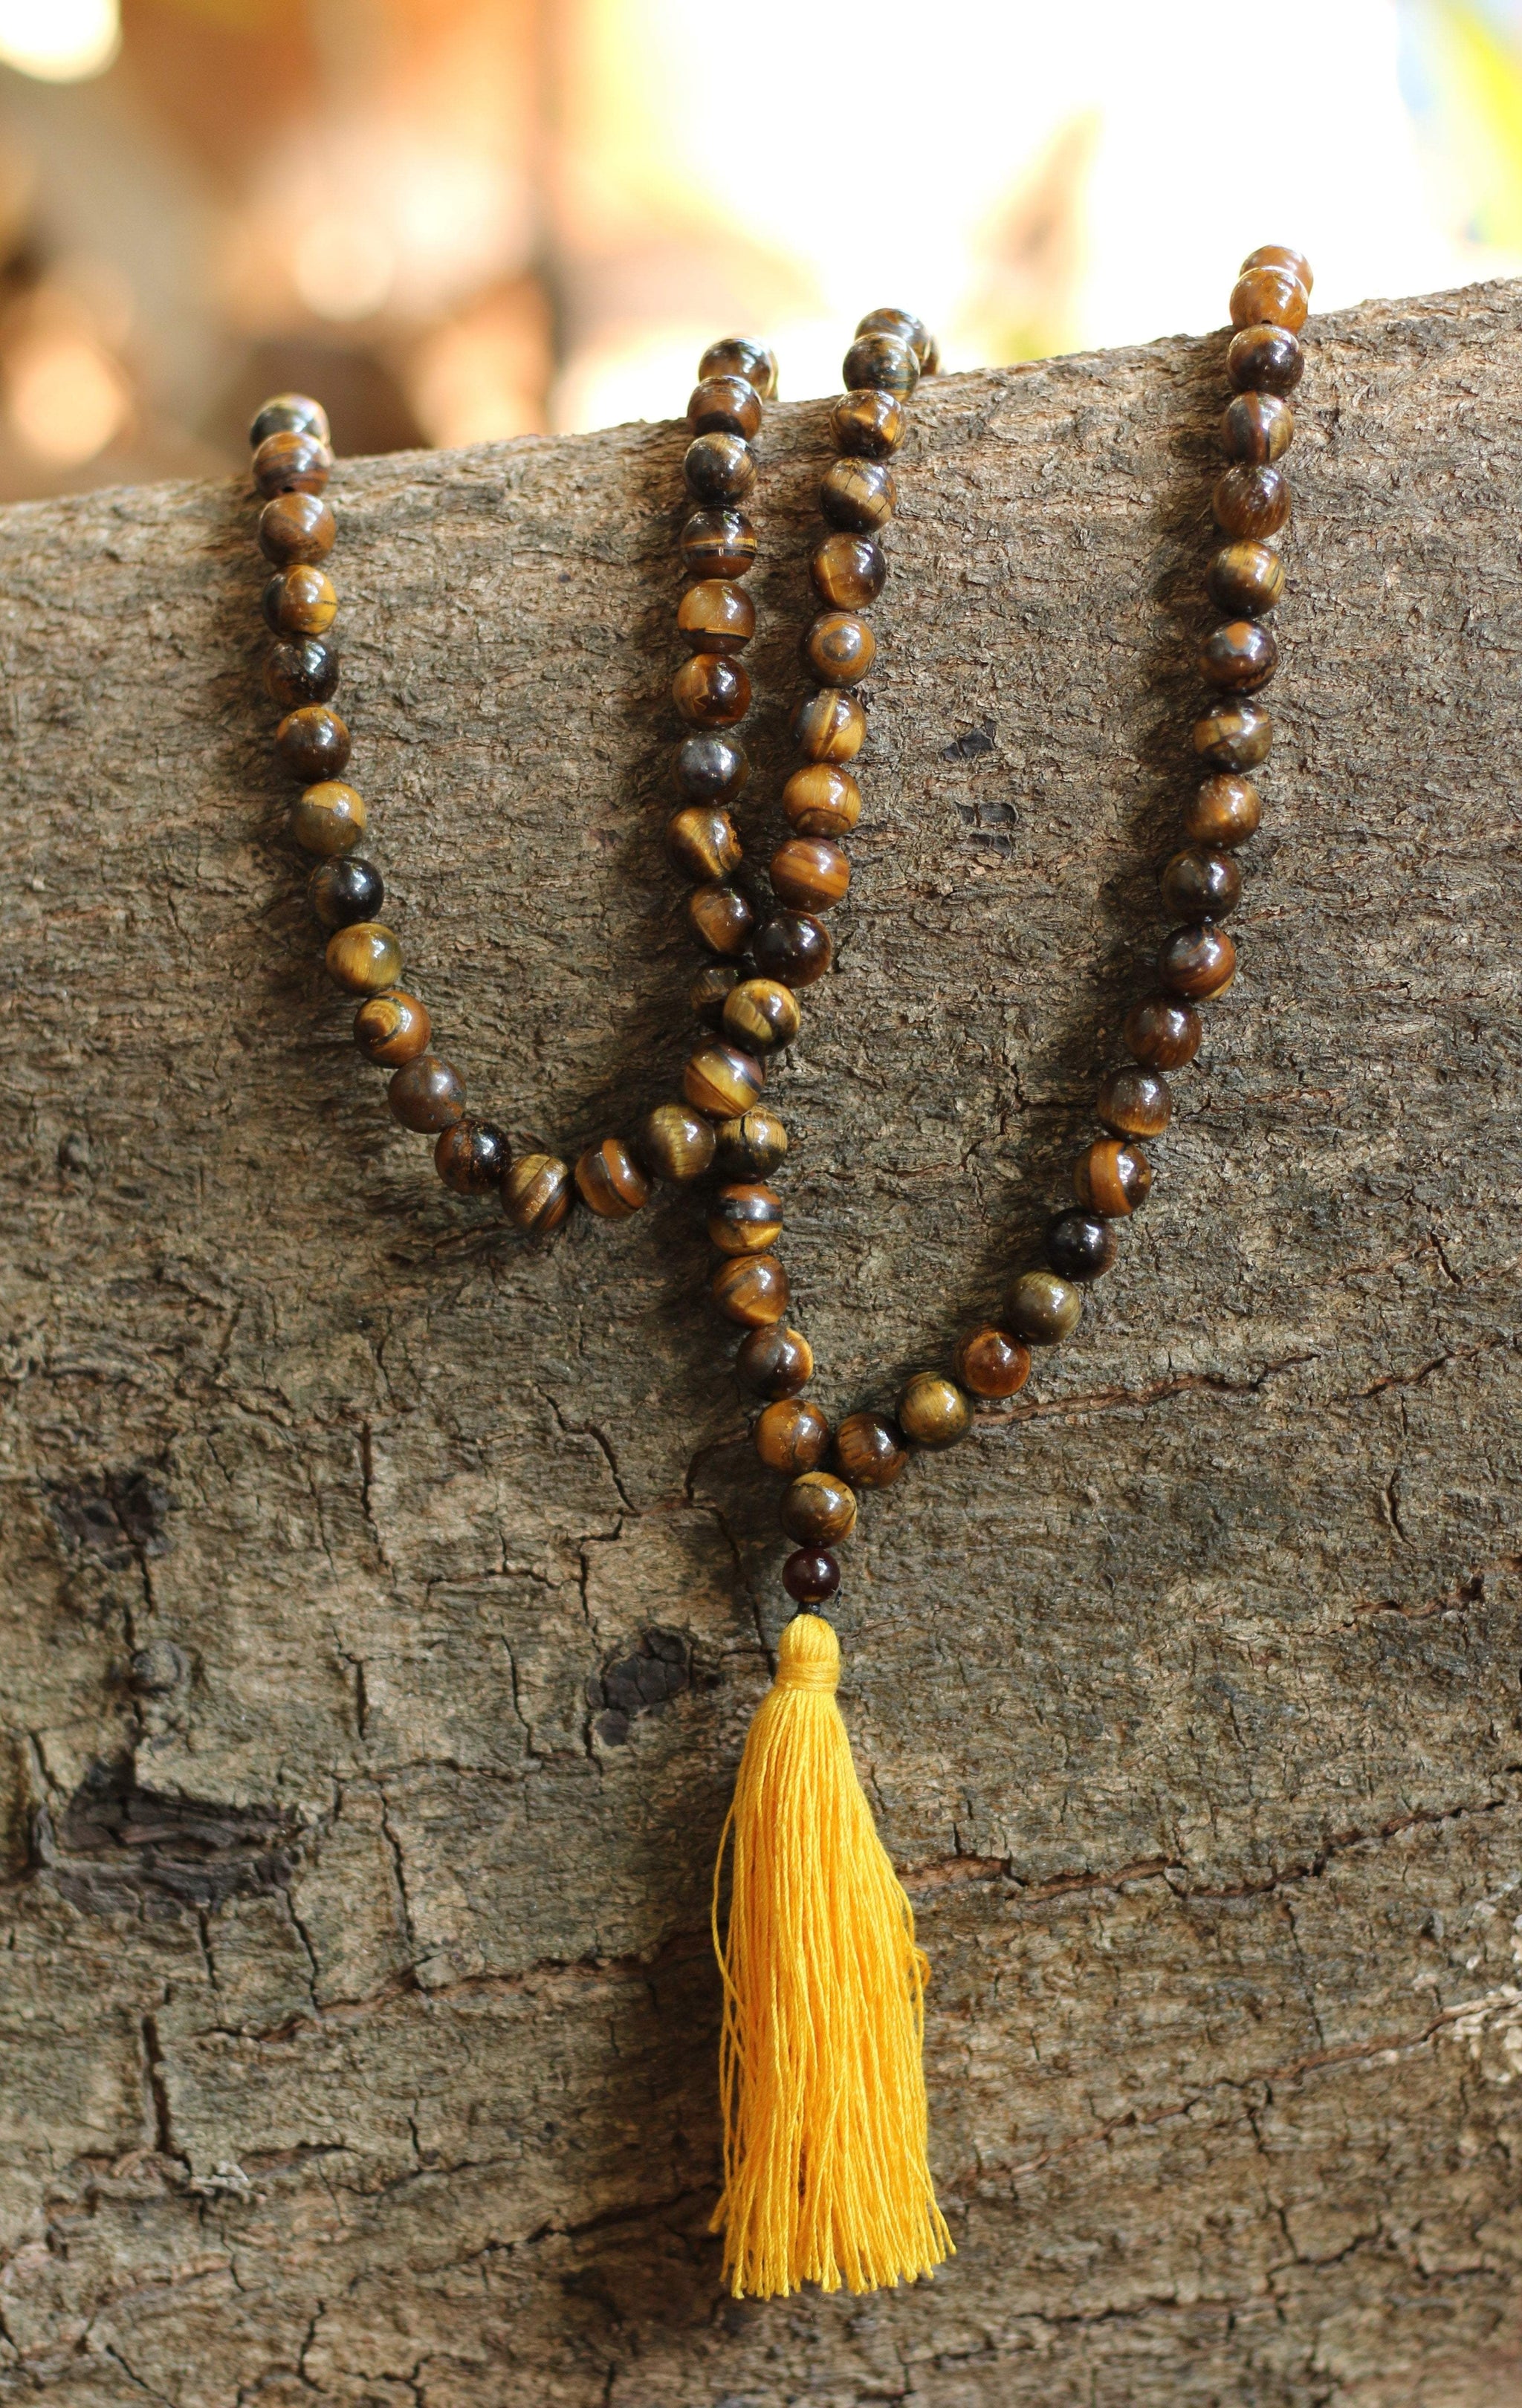 Tiger Eye Buddhist Mala Beads Necklace with Red Tassels - One Tribe Apparel